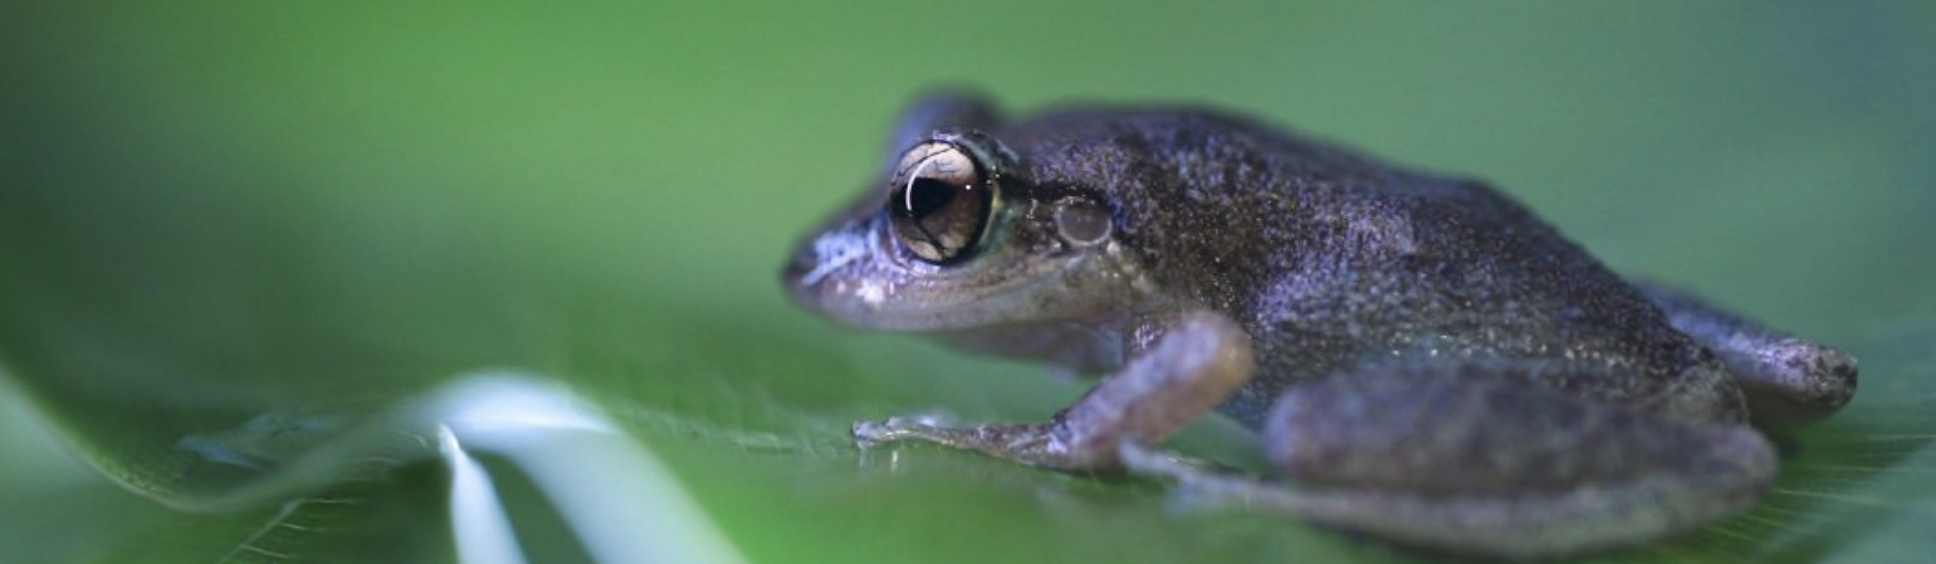 Puerto Rican coqui frog on leaf